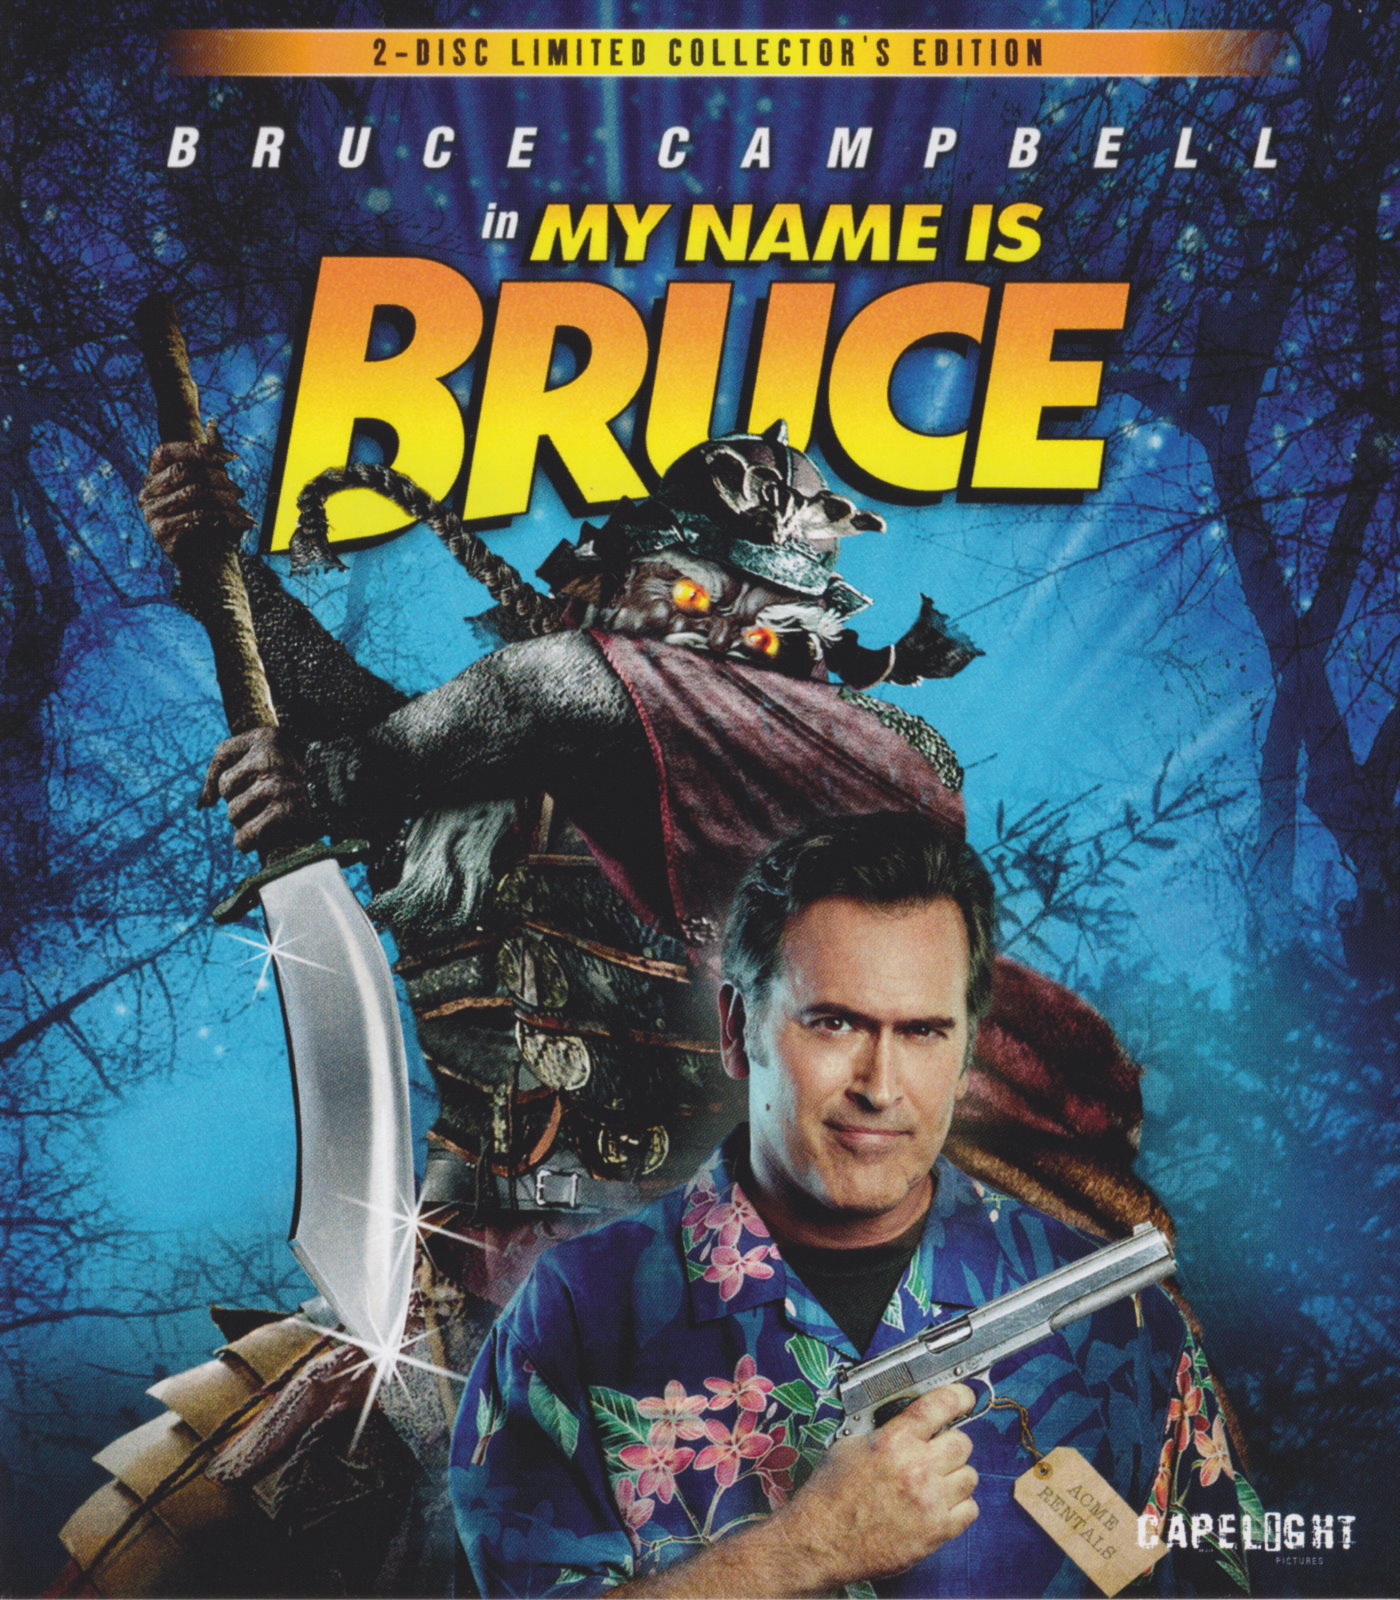 Cover - My Name is Bruce.jpg